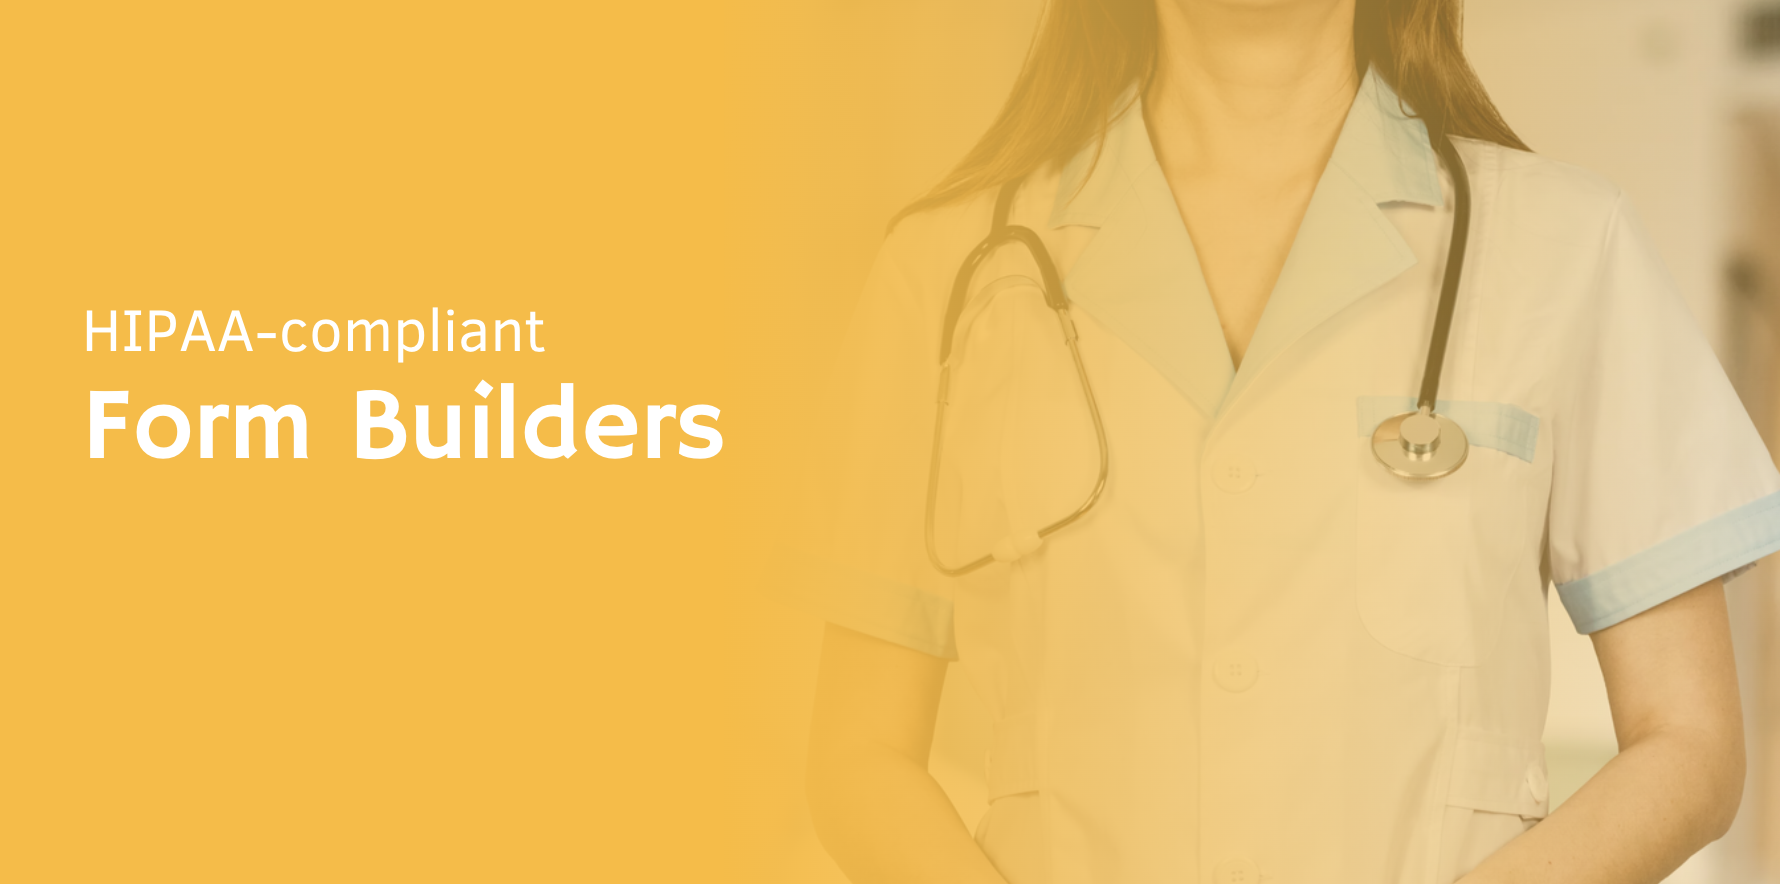 HIPAA Compliant Form Builders: The Ultimate Guide